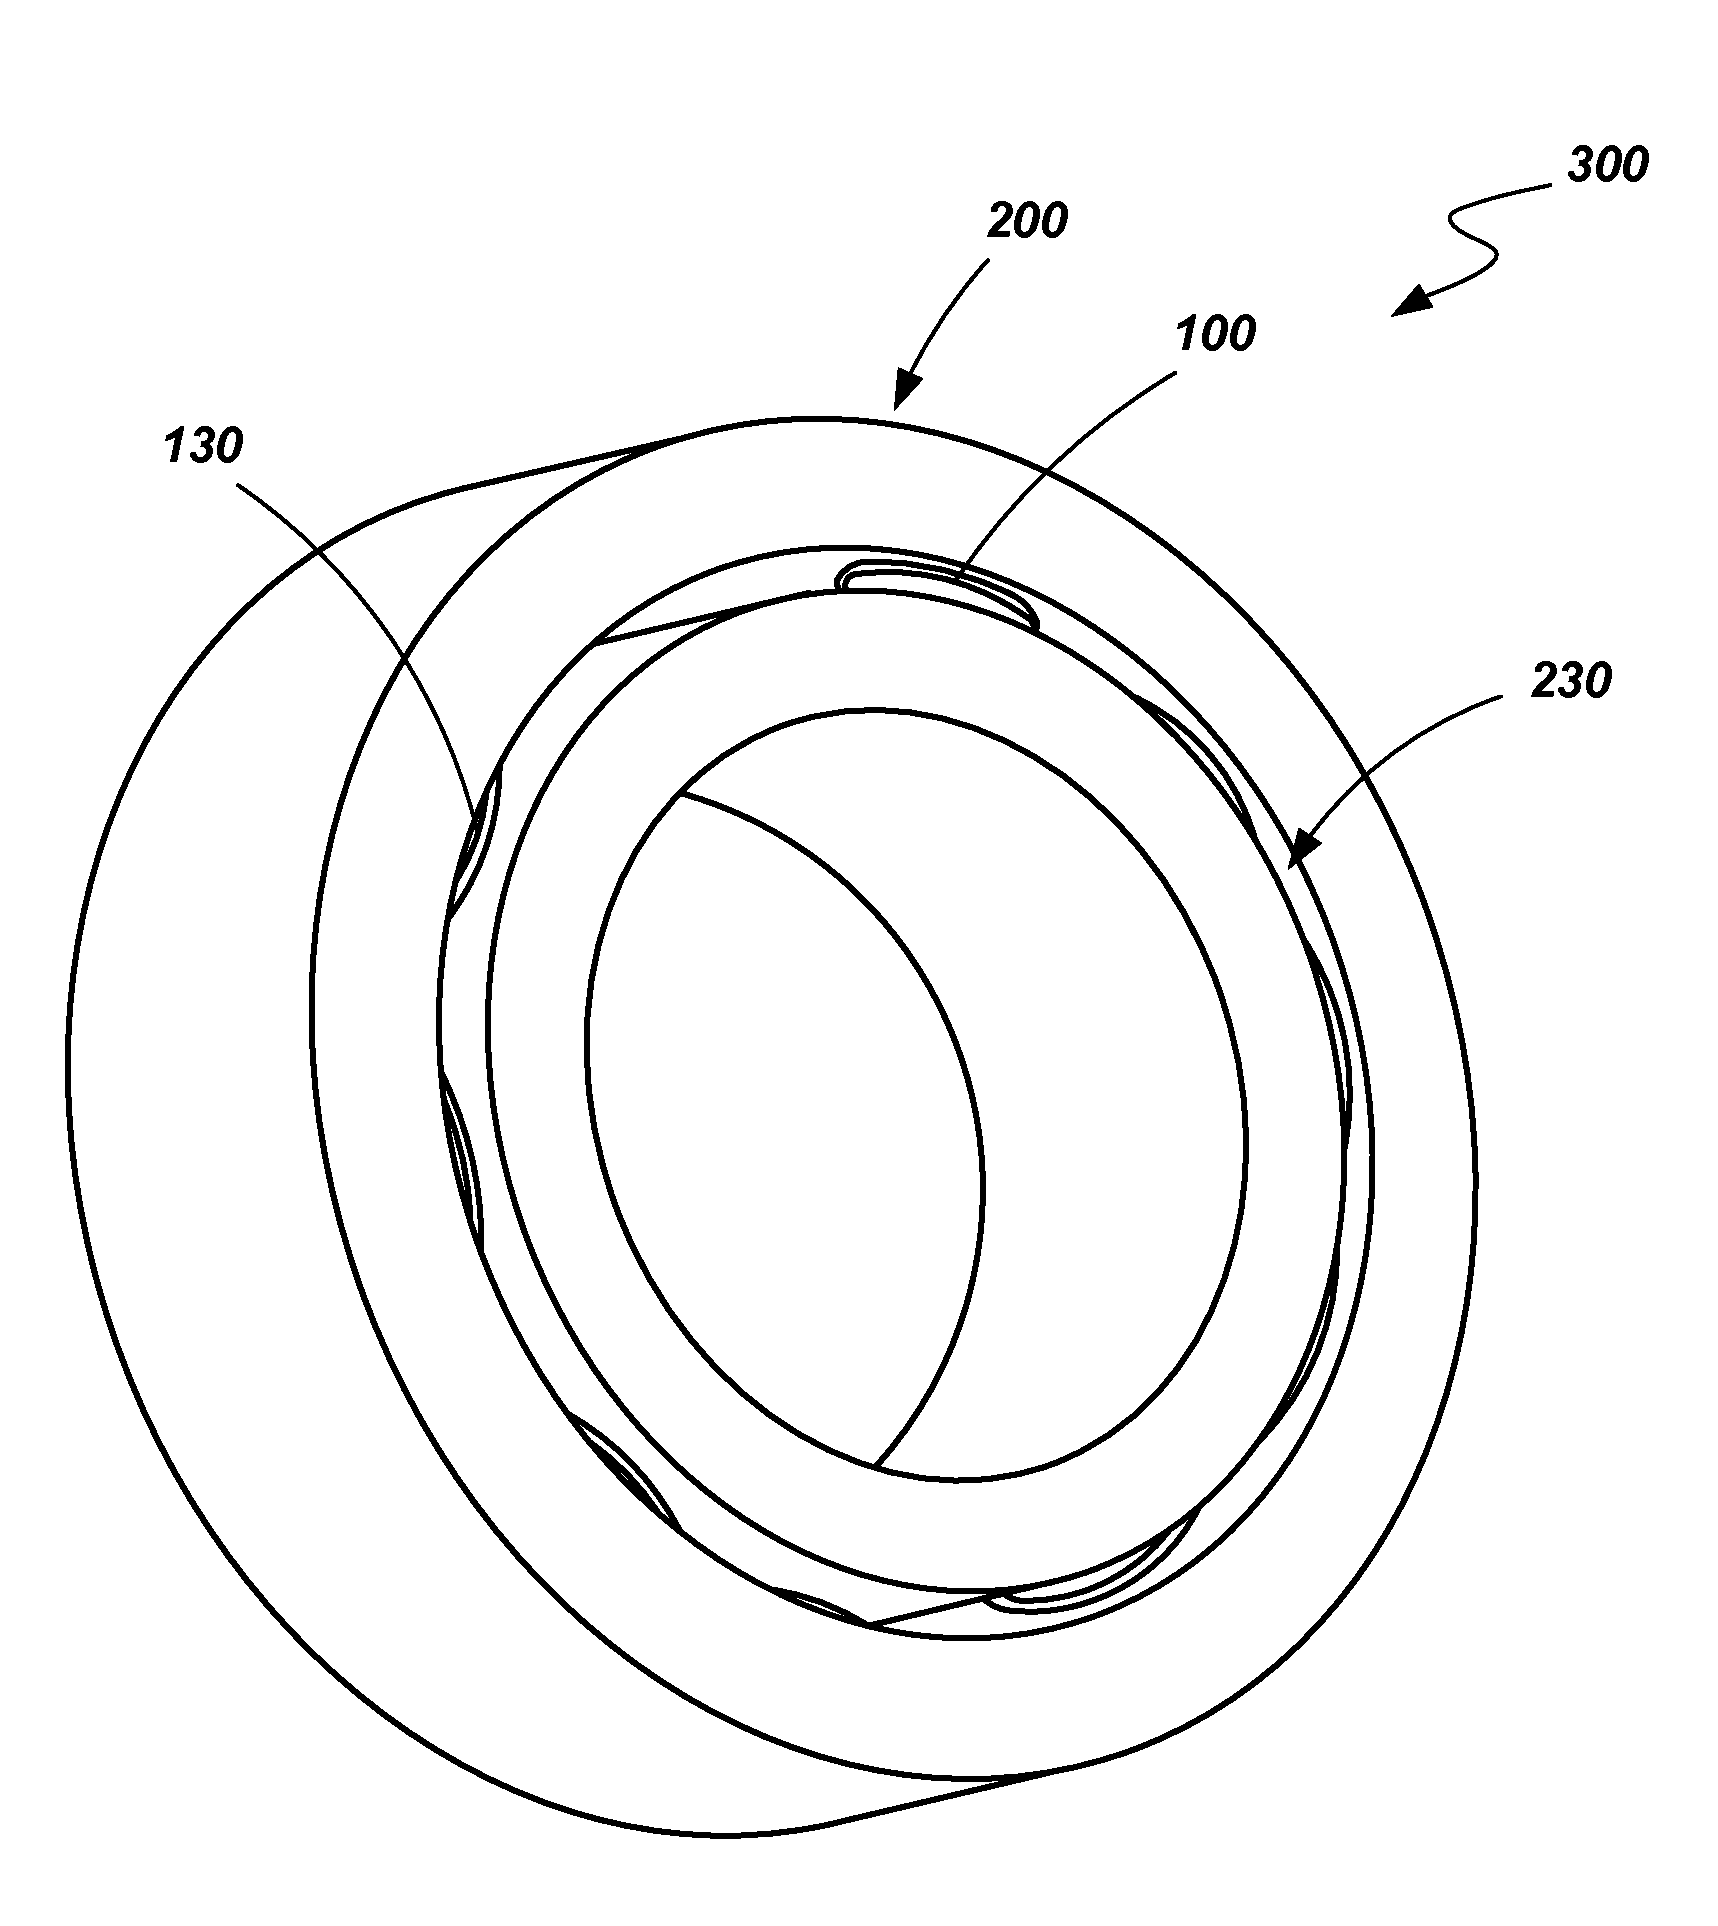 Bearing elements, bearing assemblies and related methods